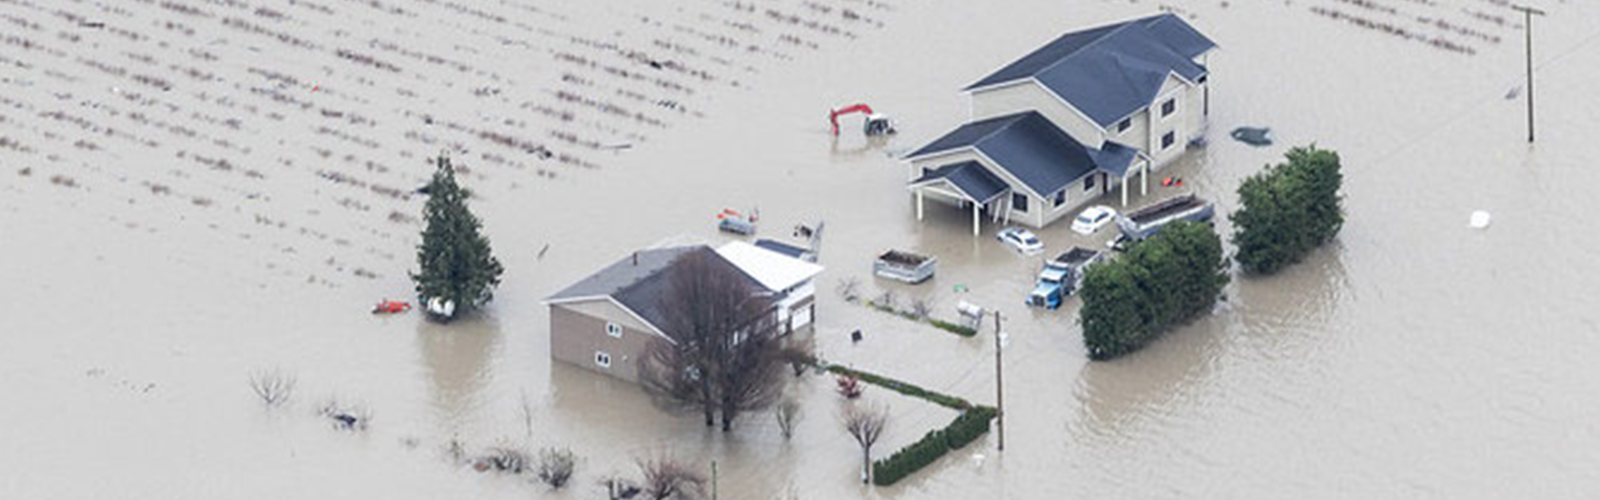 Image of houses inundated with floods and submerged in water